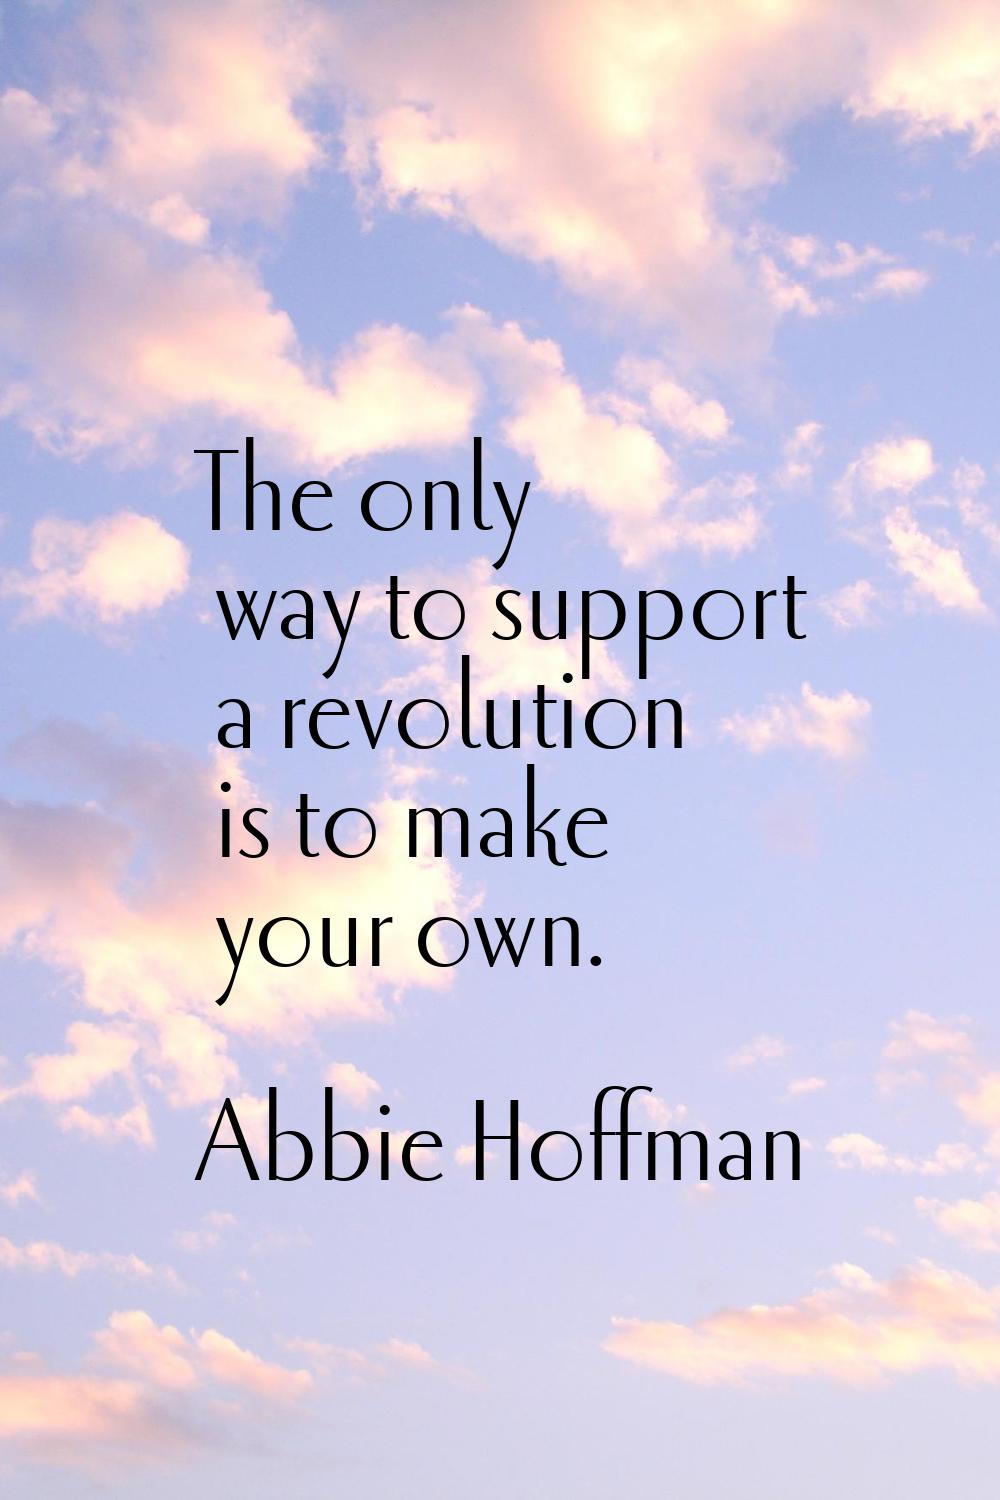 The only way to support a revolution is to make your own.